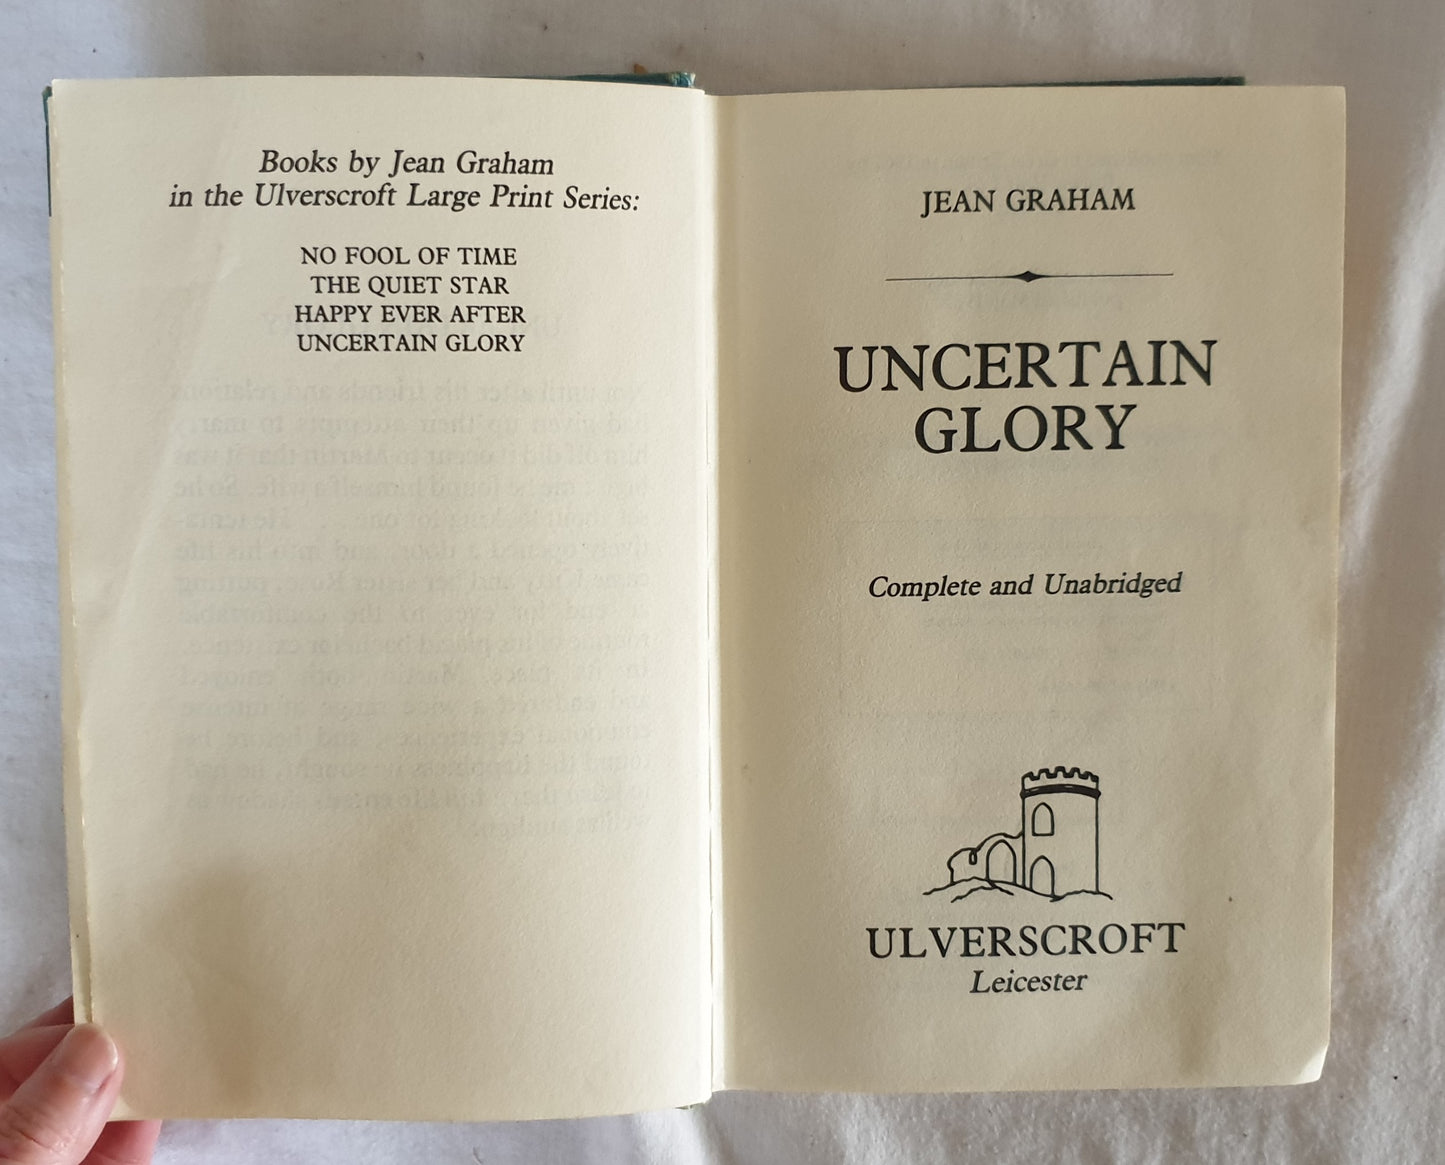 Uncertain Glory by Jean Graham